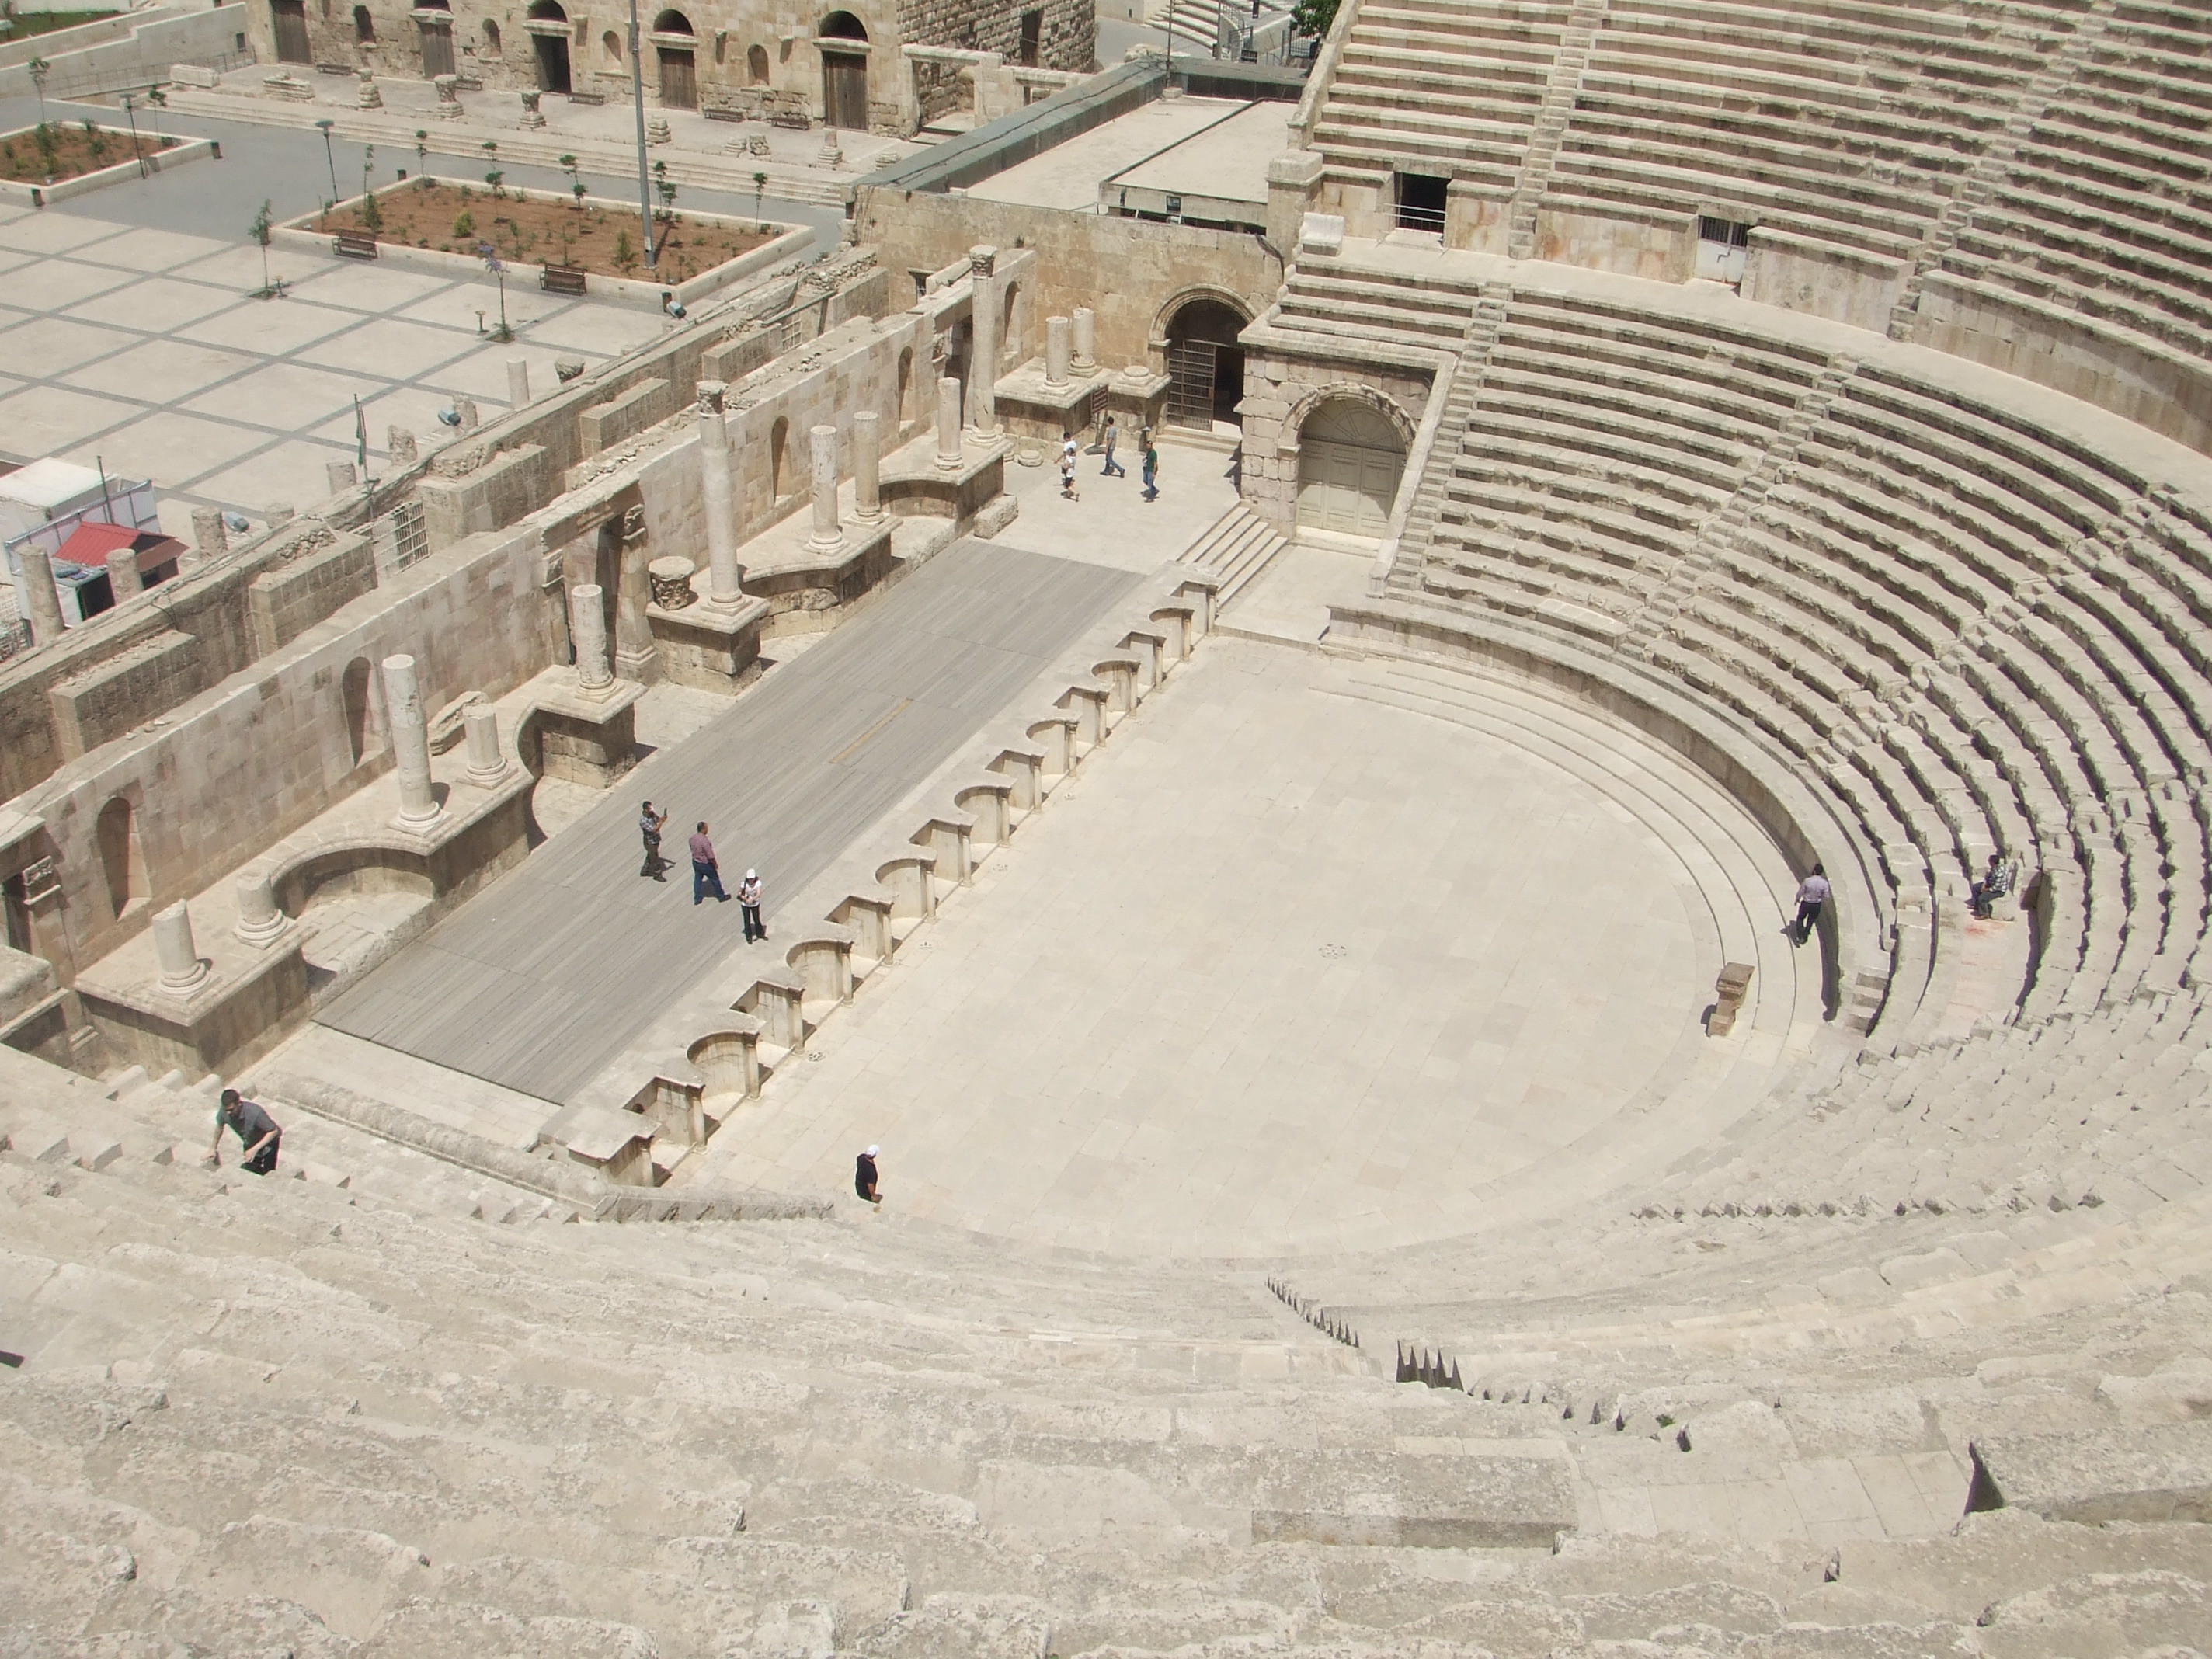 Amphitheatre, Amman Amman's city centre may have a modern feel today but is actually one of the oldest continuously inhabited cities in the World, with evidence of its classical past (as the ancient city of Philadelphia) still visible in certain areas. The most important remaining monument of the city's classical past is the stunning Roman amphitheatre. The theatre was built the reign of Antonius Pius (138-161 AD) and could seat up to 6,000 people. Built into the hillside, it was oriented north to keep the fierce sun off the spectators.